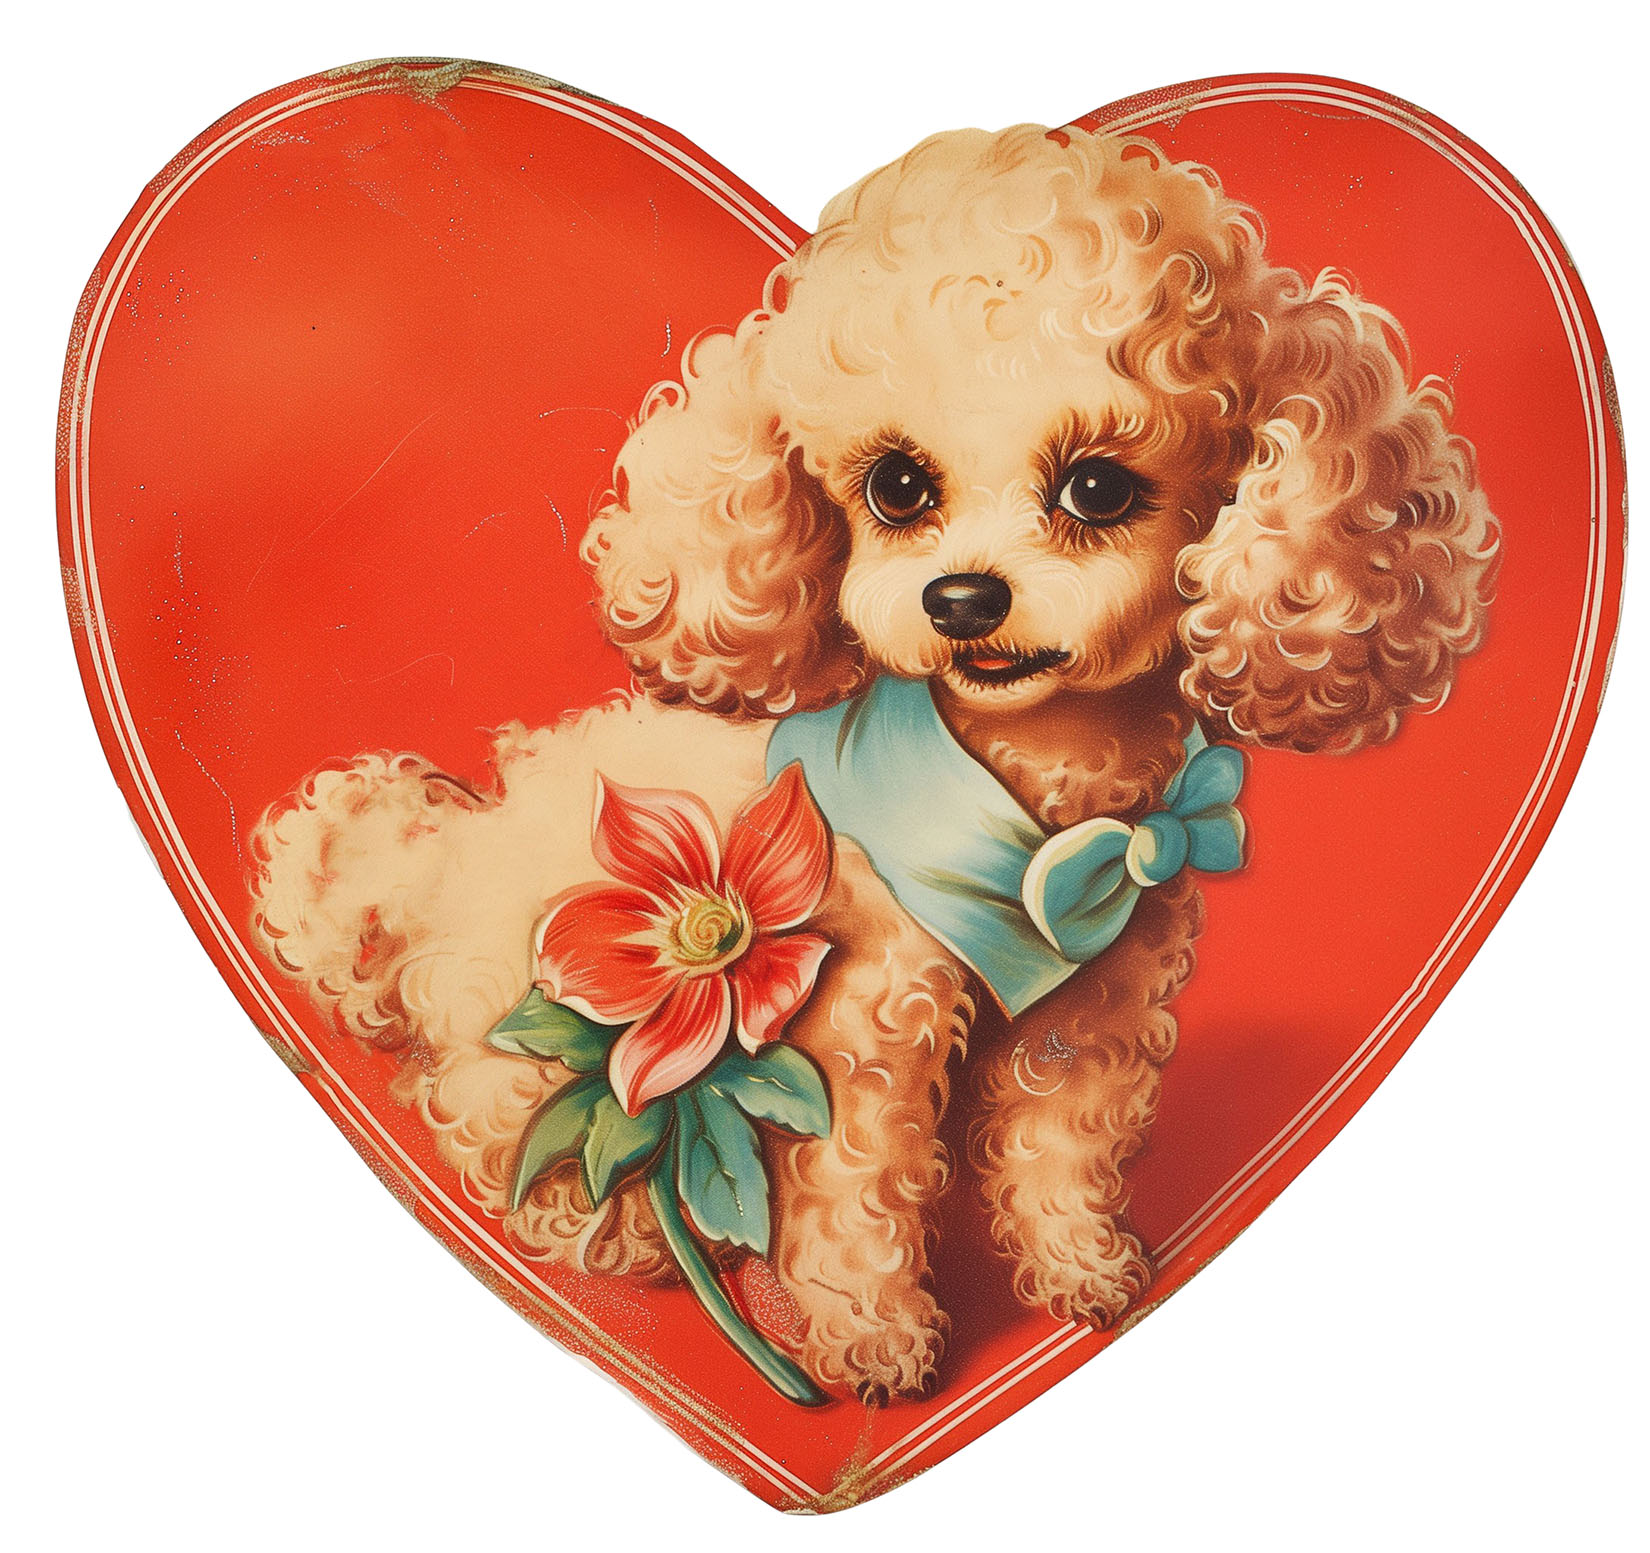 ADORABLE Vintage Valentines Day Card, Cute Colorful Graphics